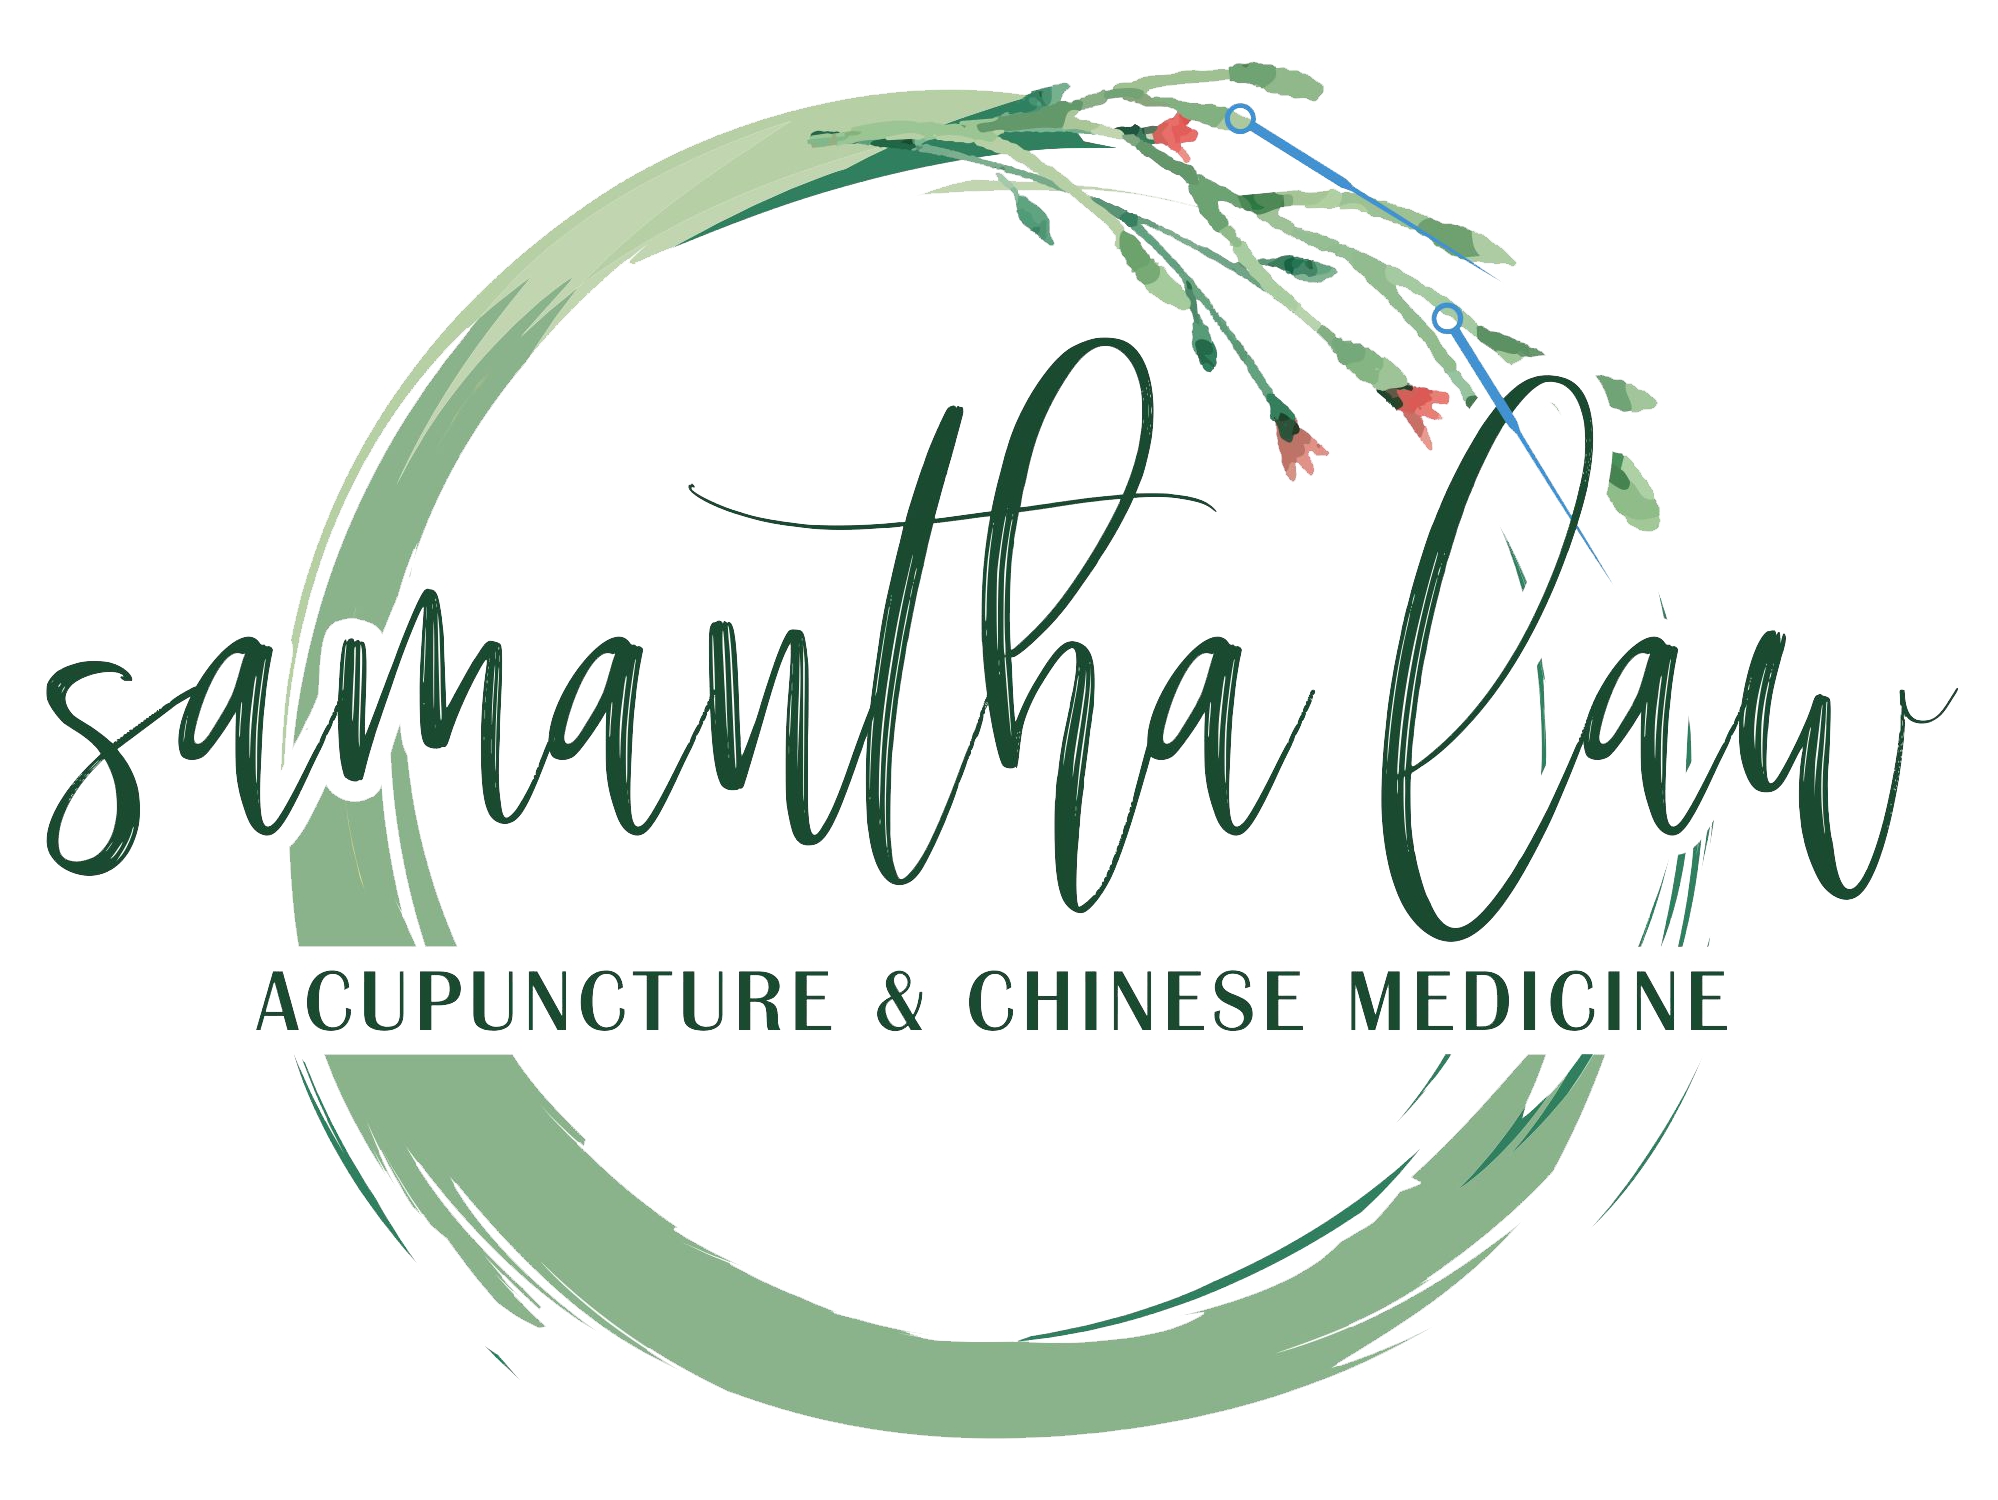 Samantha Law therapist on Natural Therapy Pages